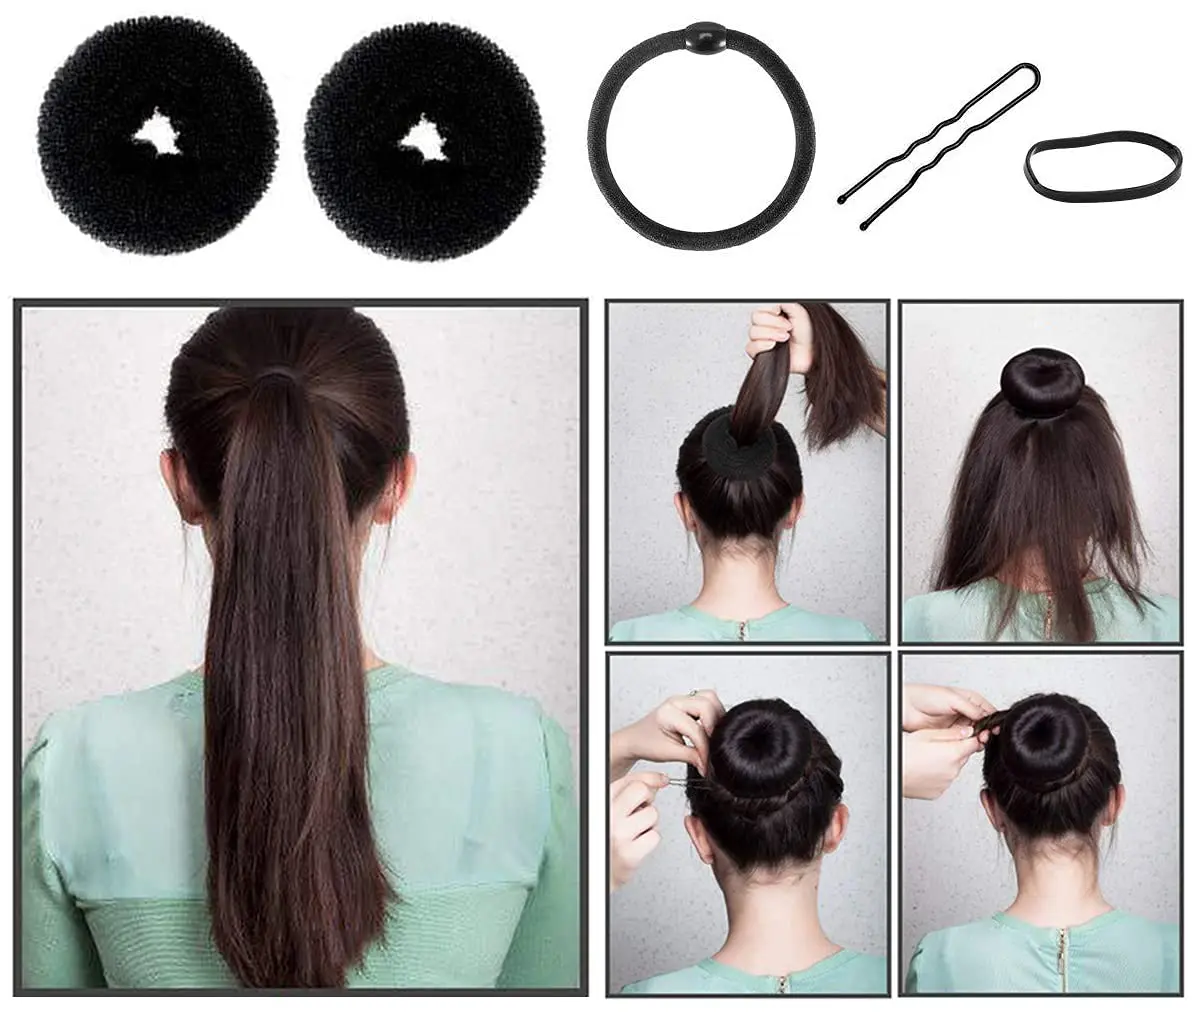 Easy Party Hair Style For Girls Hair Style Girl The Latest Fashion News And  Trends Updates | Winkeyes Hair Styling Set, Hair Design Styling Tools  Accessories Diy Hair Accessories Hair Modelling Tool